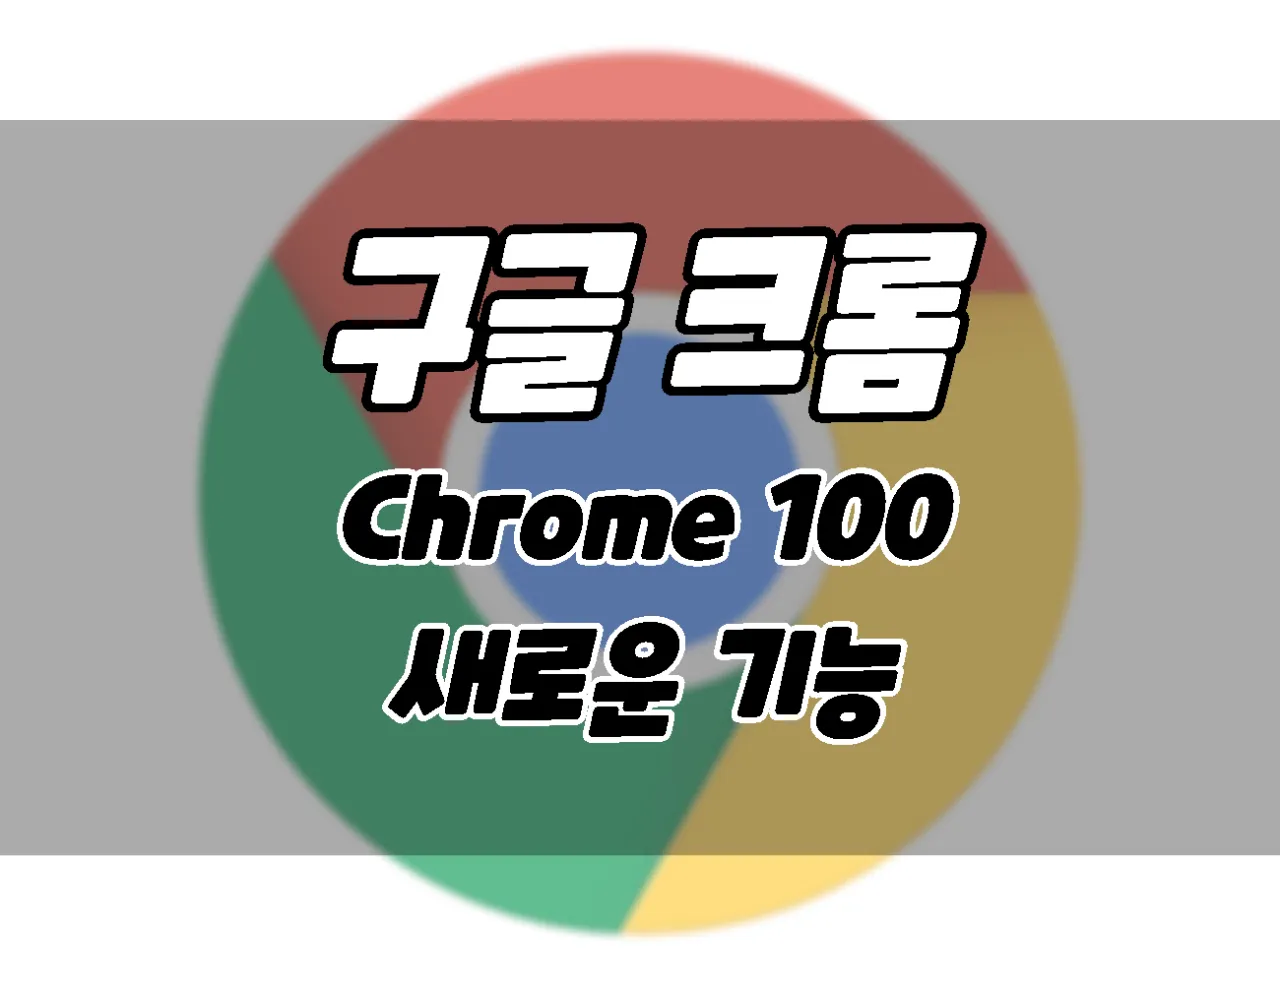 Google Chrome 100 update new features and update method